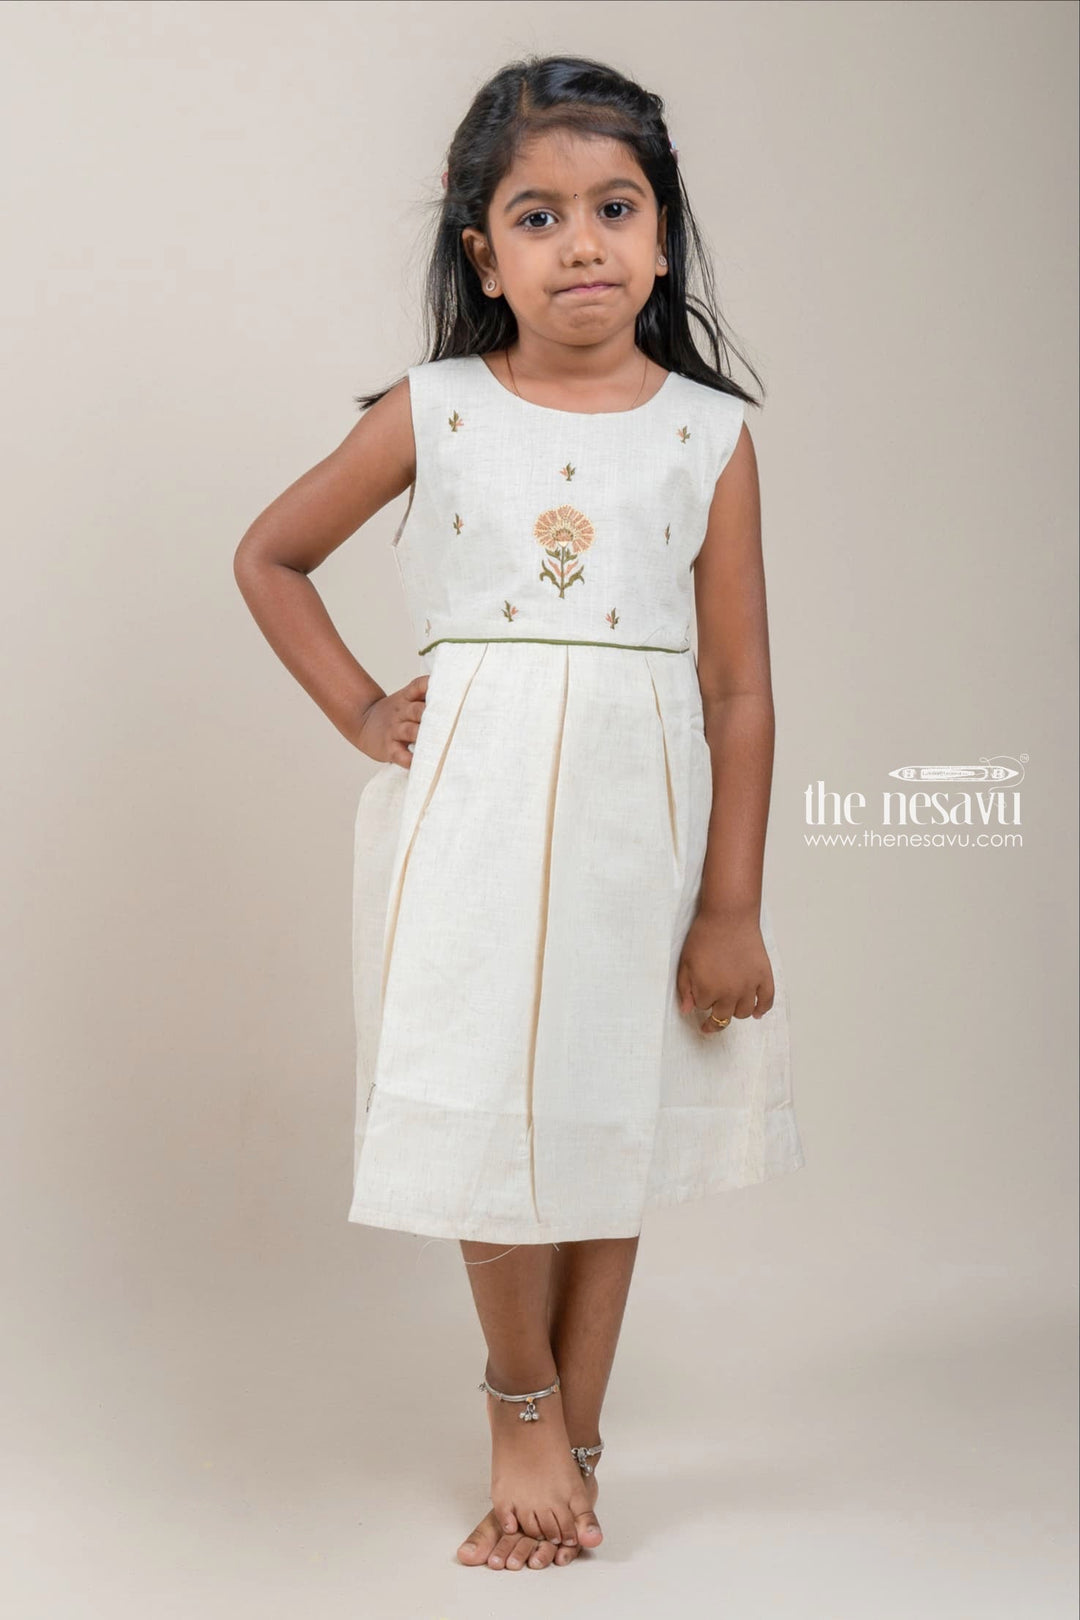 The Nesavu Girls Cotton Frock Floral Embroidered Box Pleated Sleeveless Half White Cotton Frock for Girls Nesavu 16 (1Y) / Half White / Cotton GFC1057A-16 Floral Embroidered Box Pleated Sleeveless Beige Cotton Frock for Girls | The Nesavu